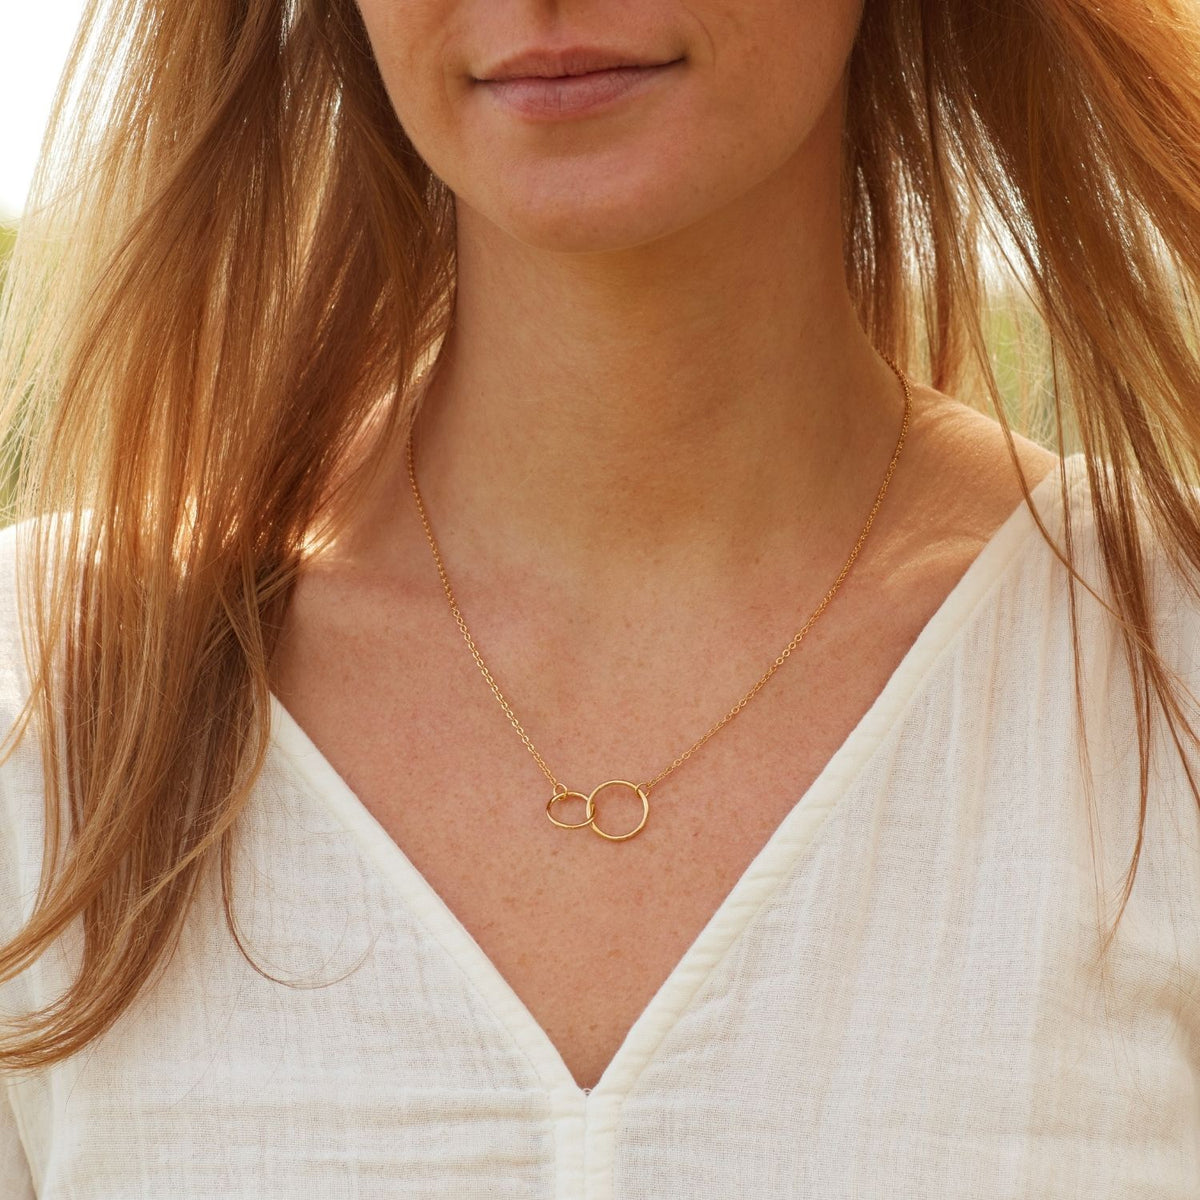 Promise Necklace | Wherever the Journey Takes Us | Interlocking Circles